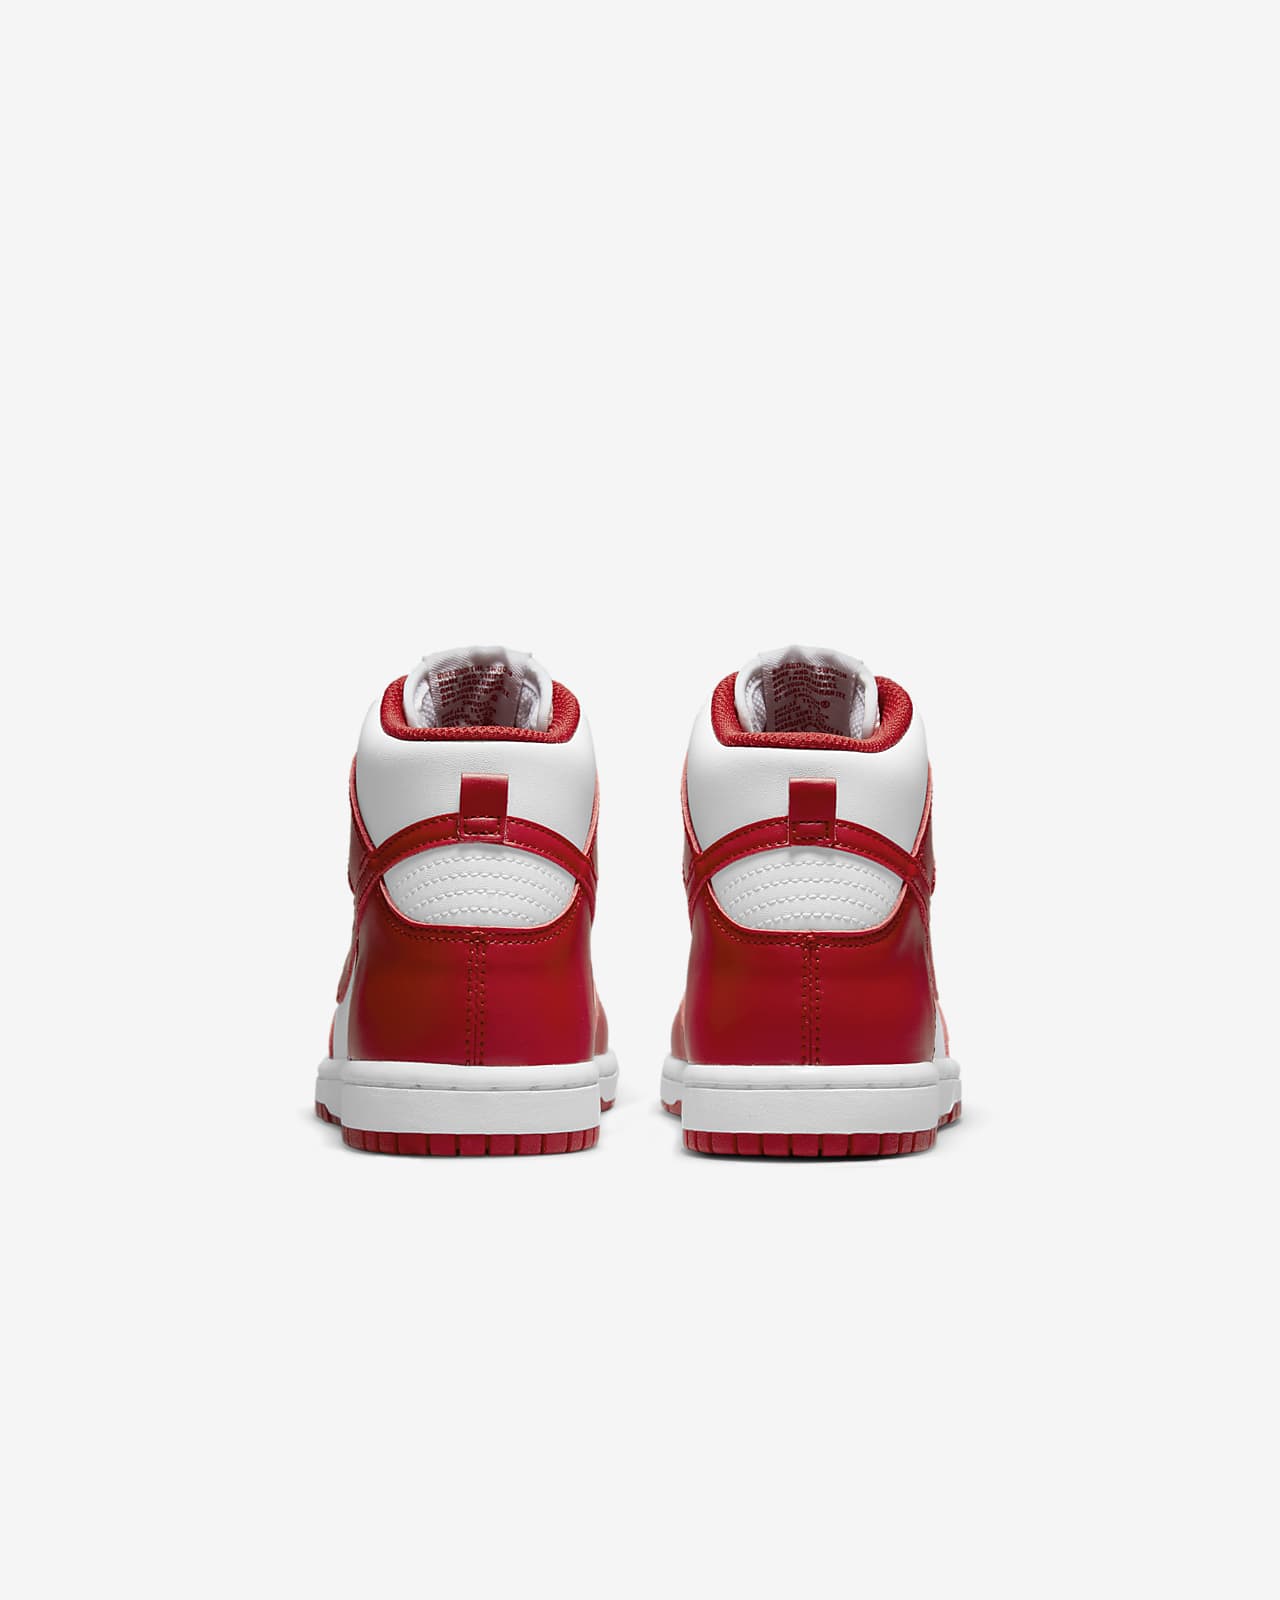 Nike Dunk High Younger Kids' Shoes